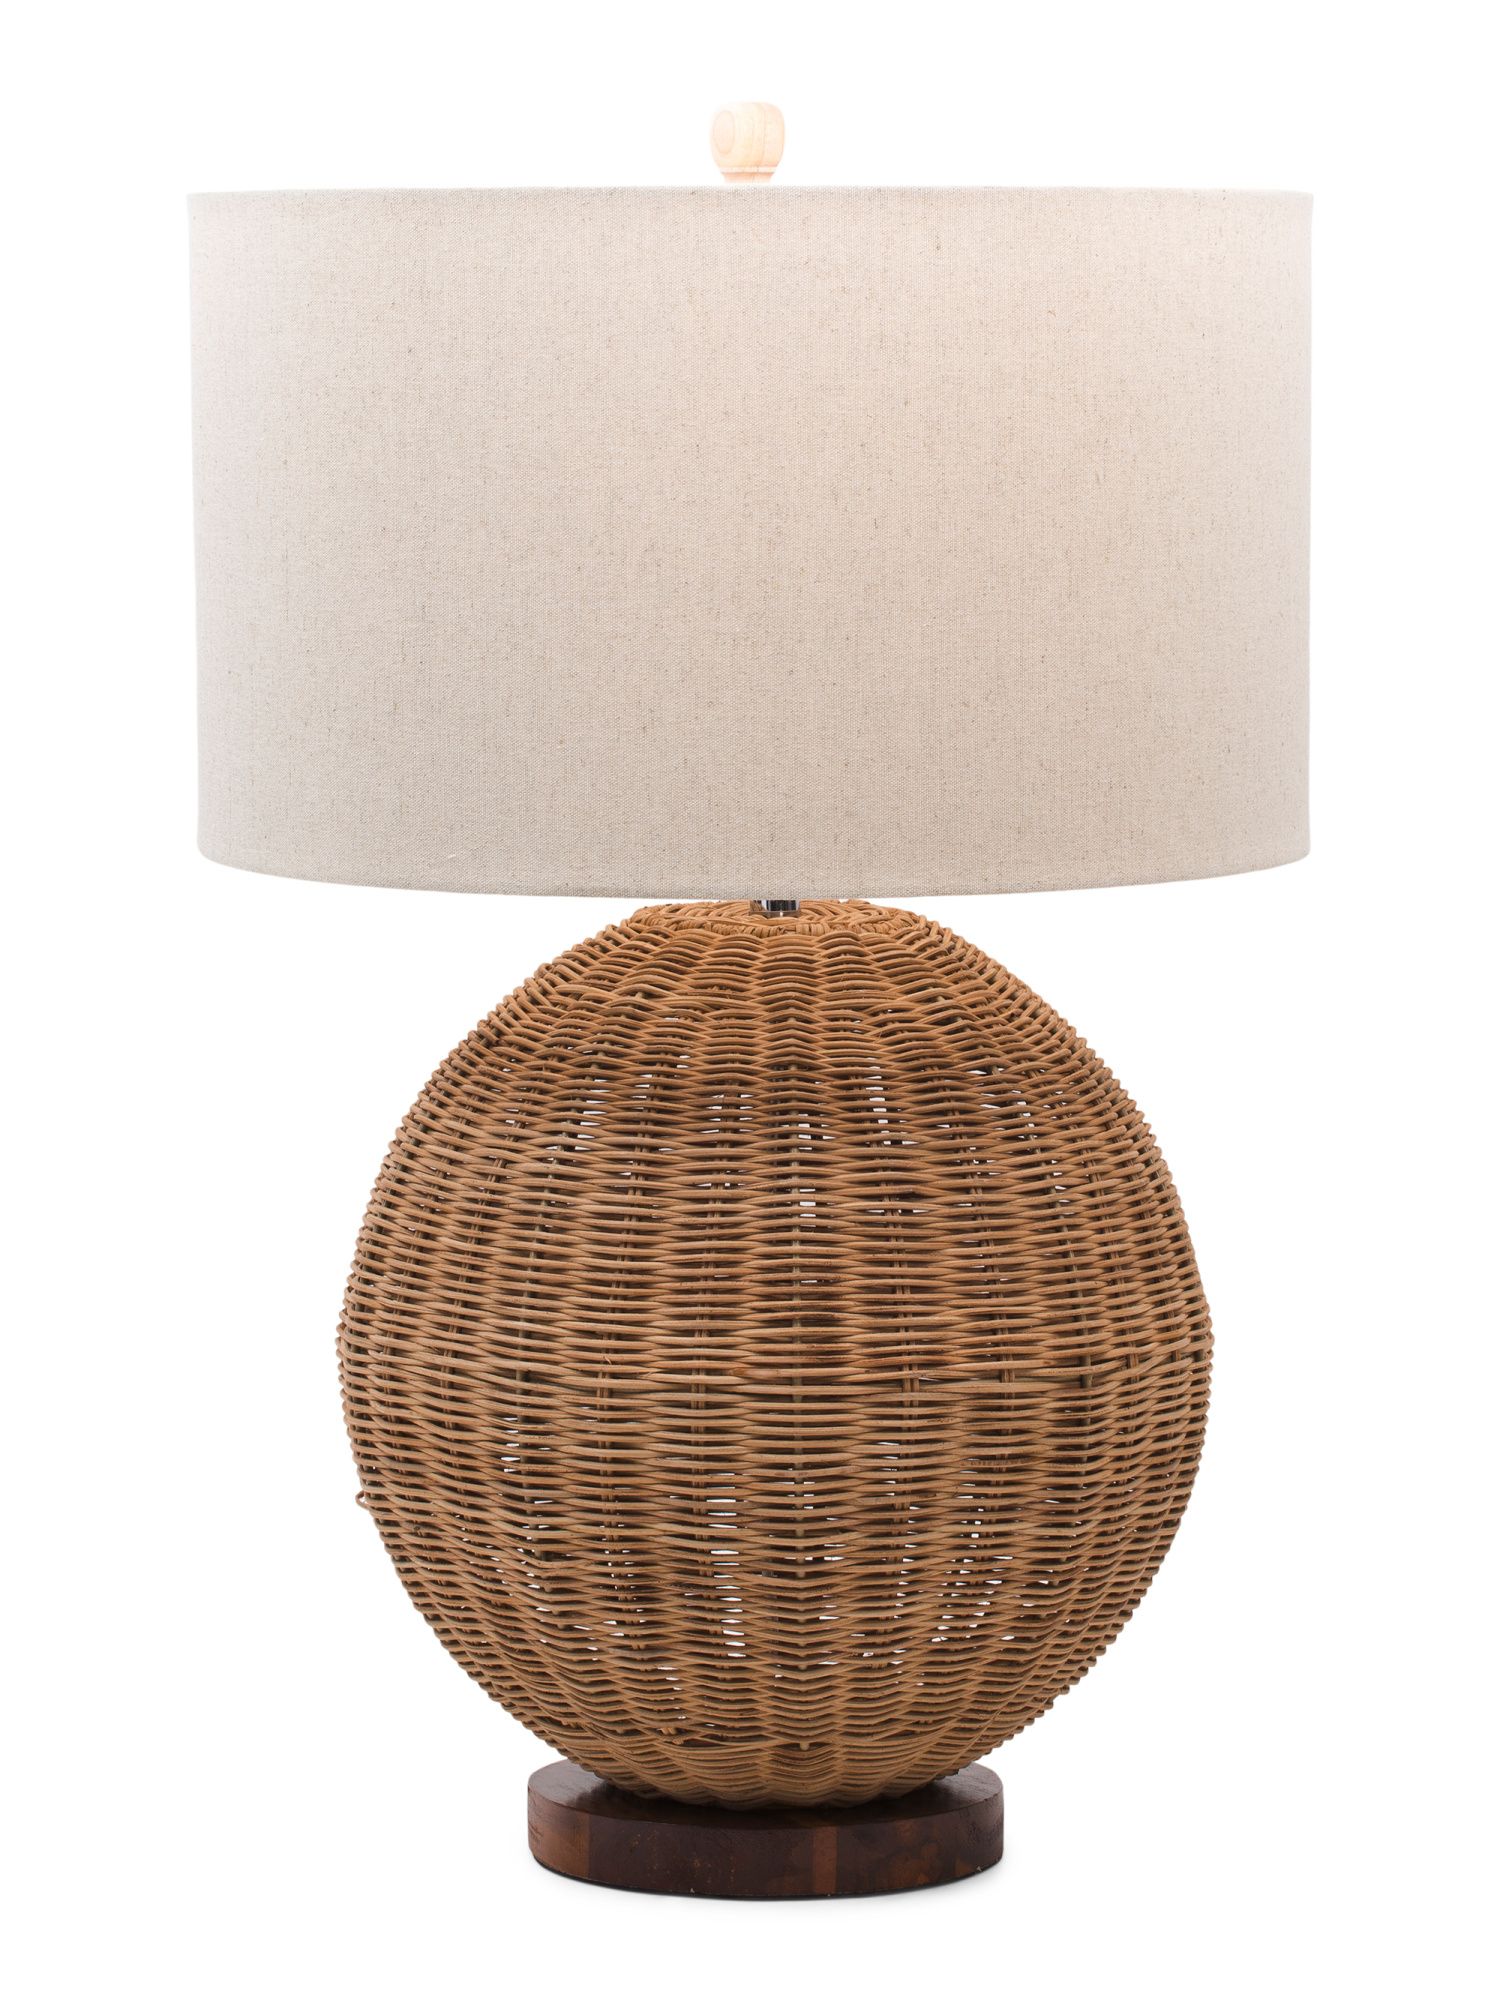 Rattan And Metal Lamp With Harp Shade | TJ Maxx